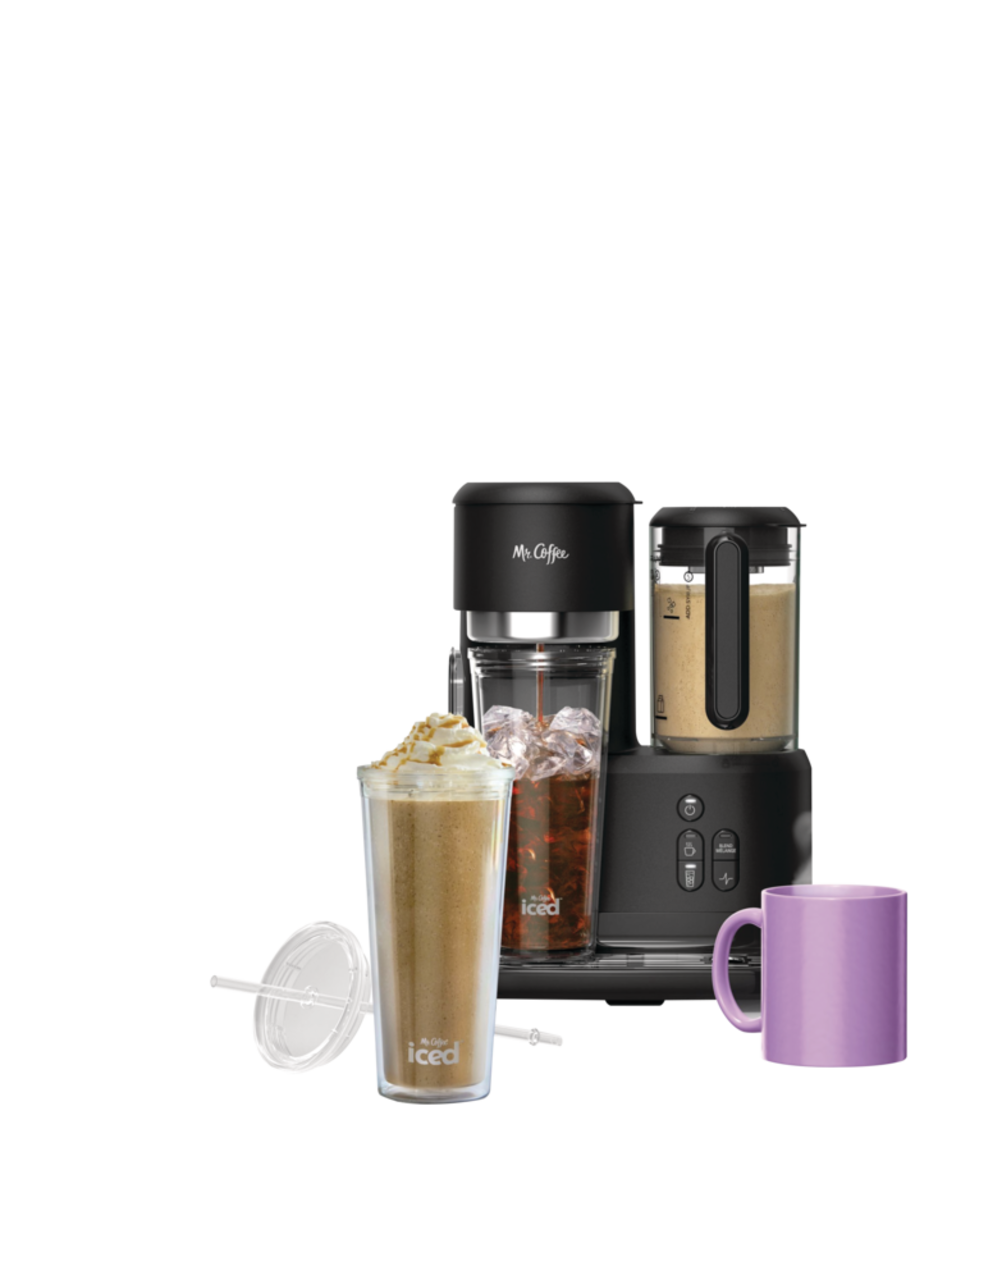 https://media-www.canadiantire.ca/product/living/kitchen/kitchen-appliances/0430151/mr-coffee-frappe-iced-and-hot-coffee-maker-and-blender-eb18d176-a184-48c8-aa03-d69fd1c6db45.png?imdensity=1&imwidth=1244&impolicy=mZoom